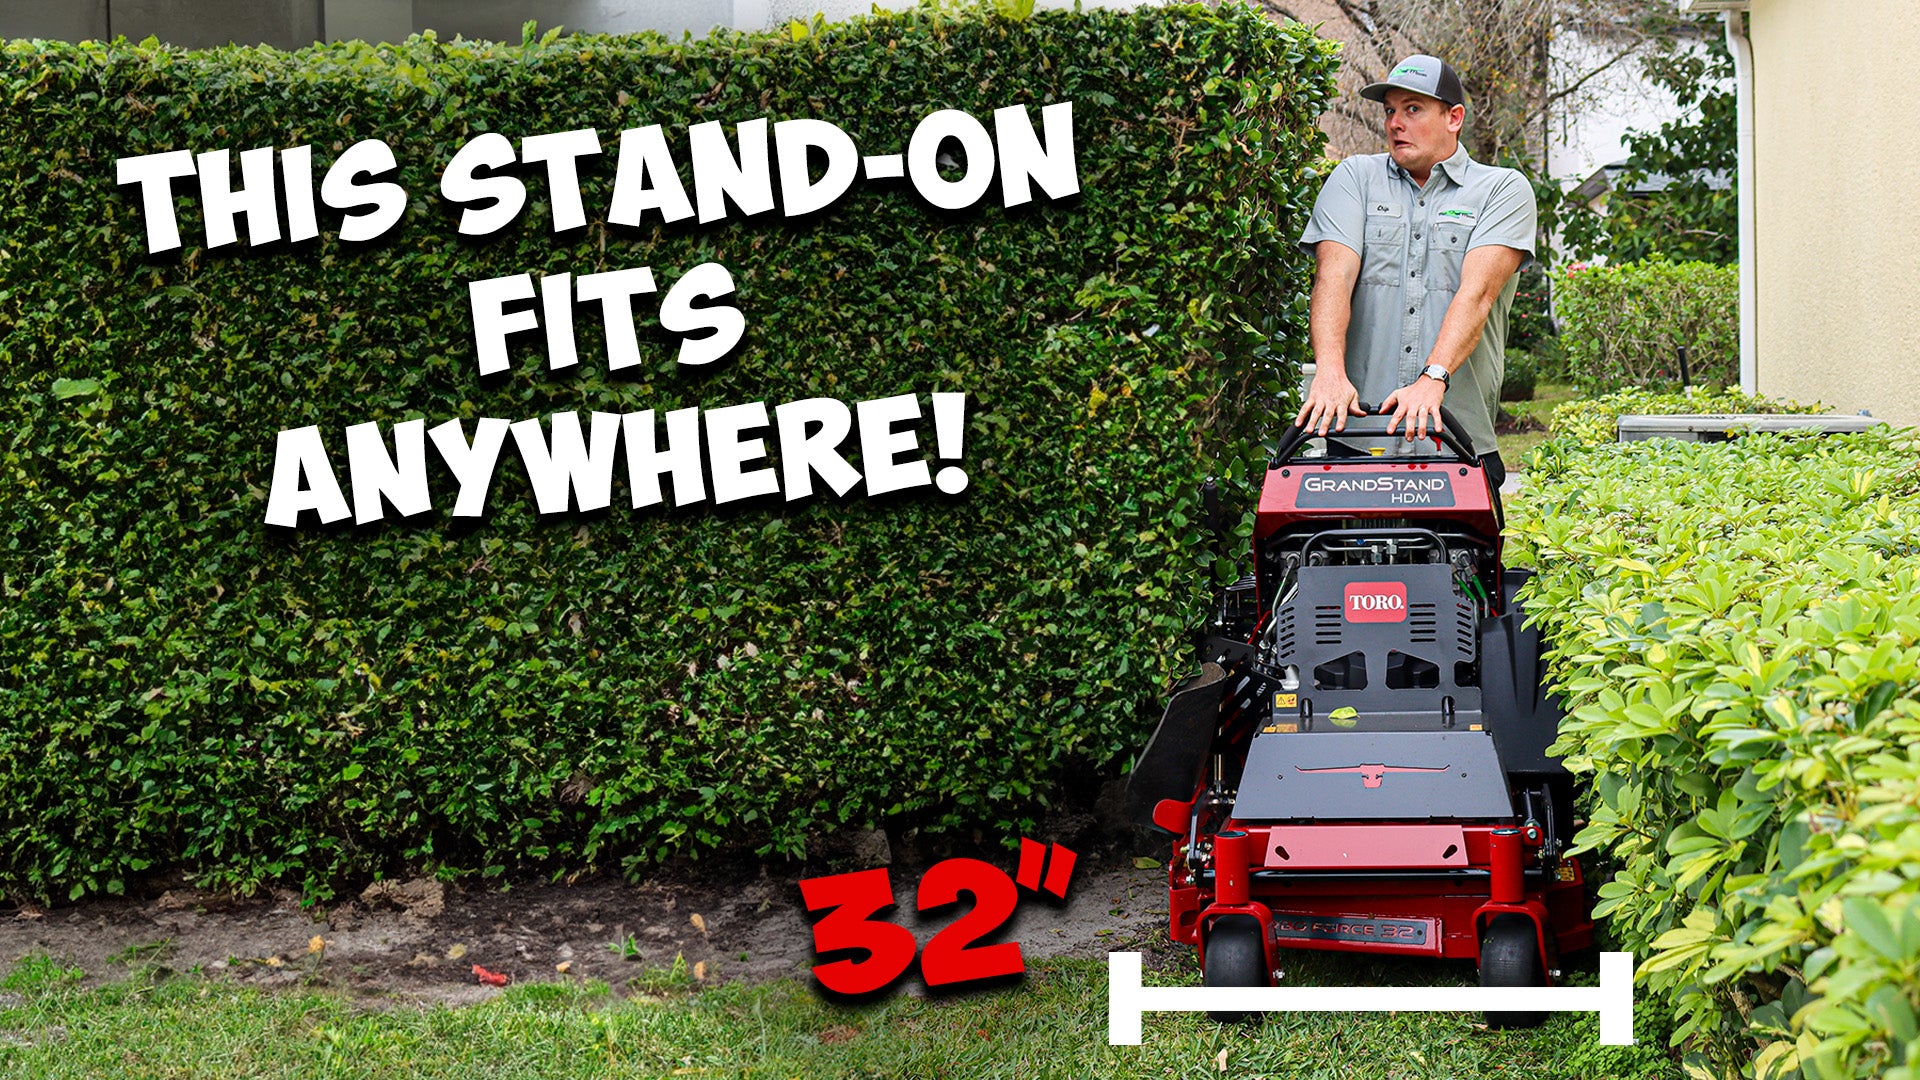 NEW 32" toro Grandstand HDM - The narrowest Stand-on mower EVER!